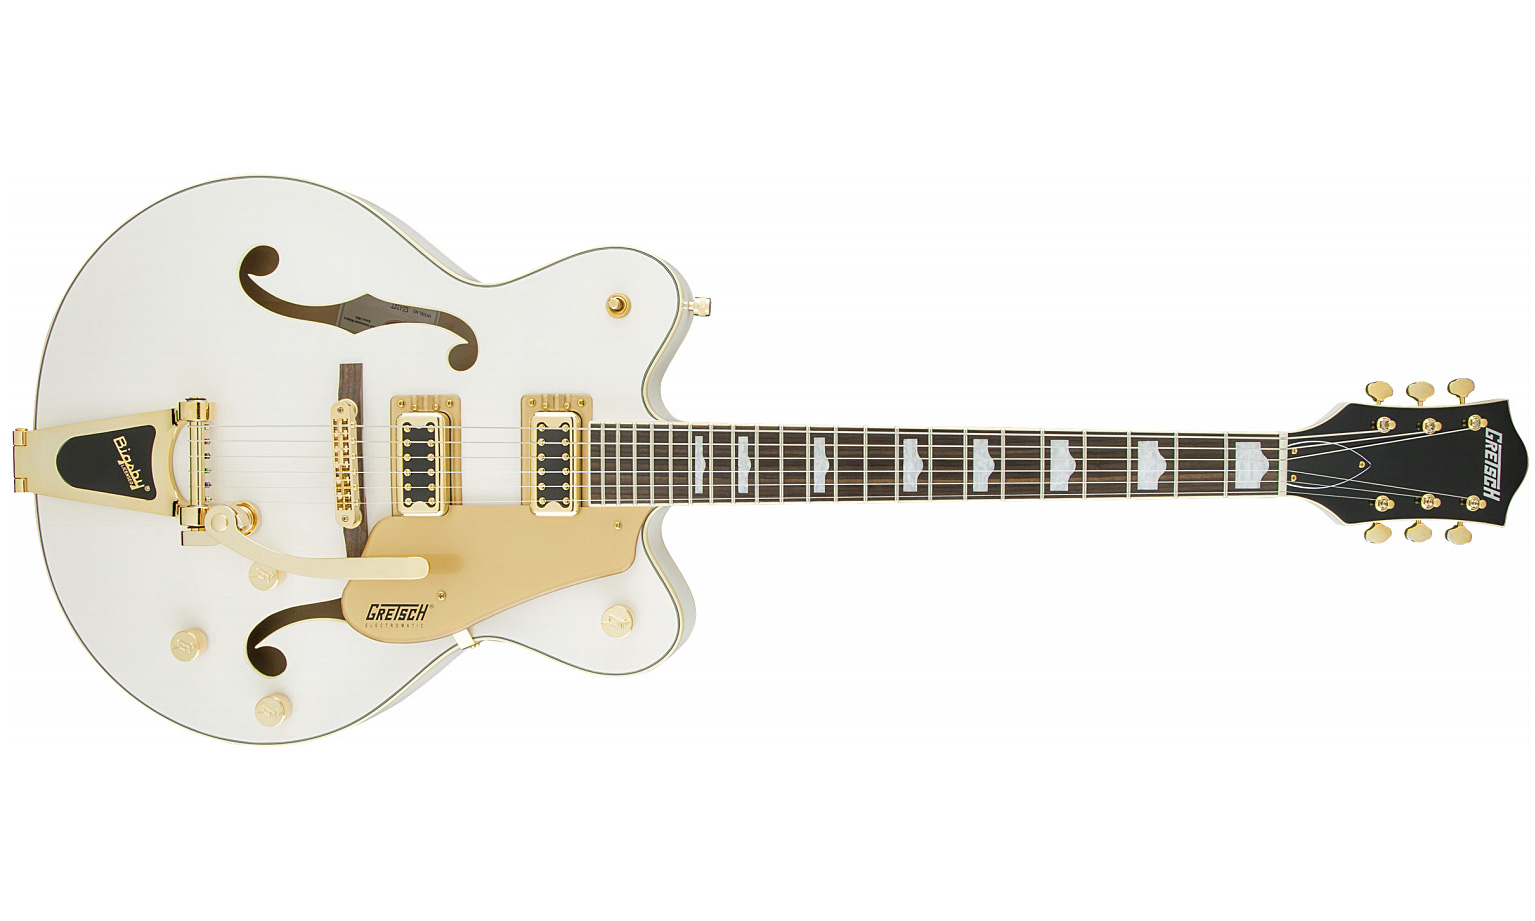 Gretsch G5422tg Electromatic Hollow Body 2016 Bigsby - Snowcrest White - Hollow-body electric guitar - Variation 1